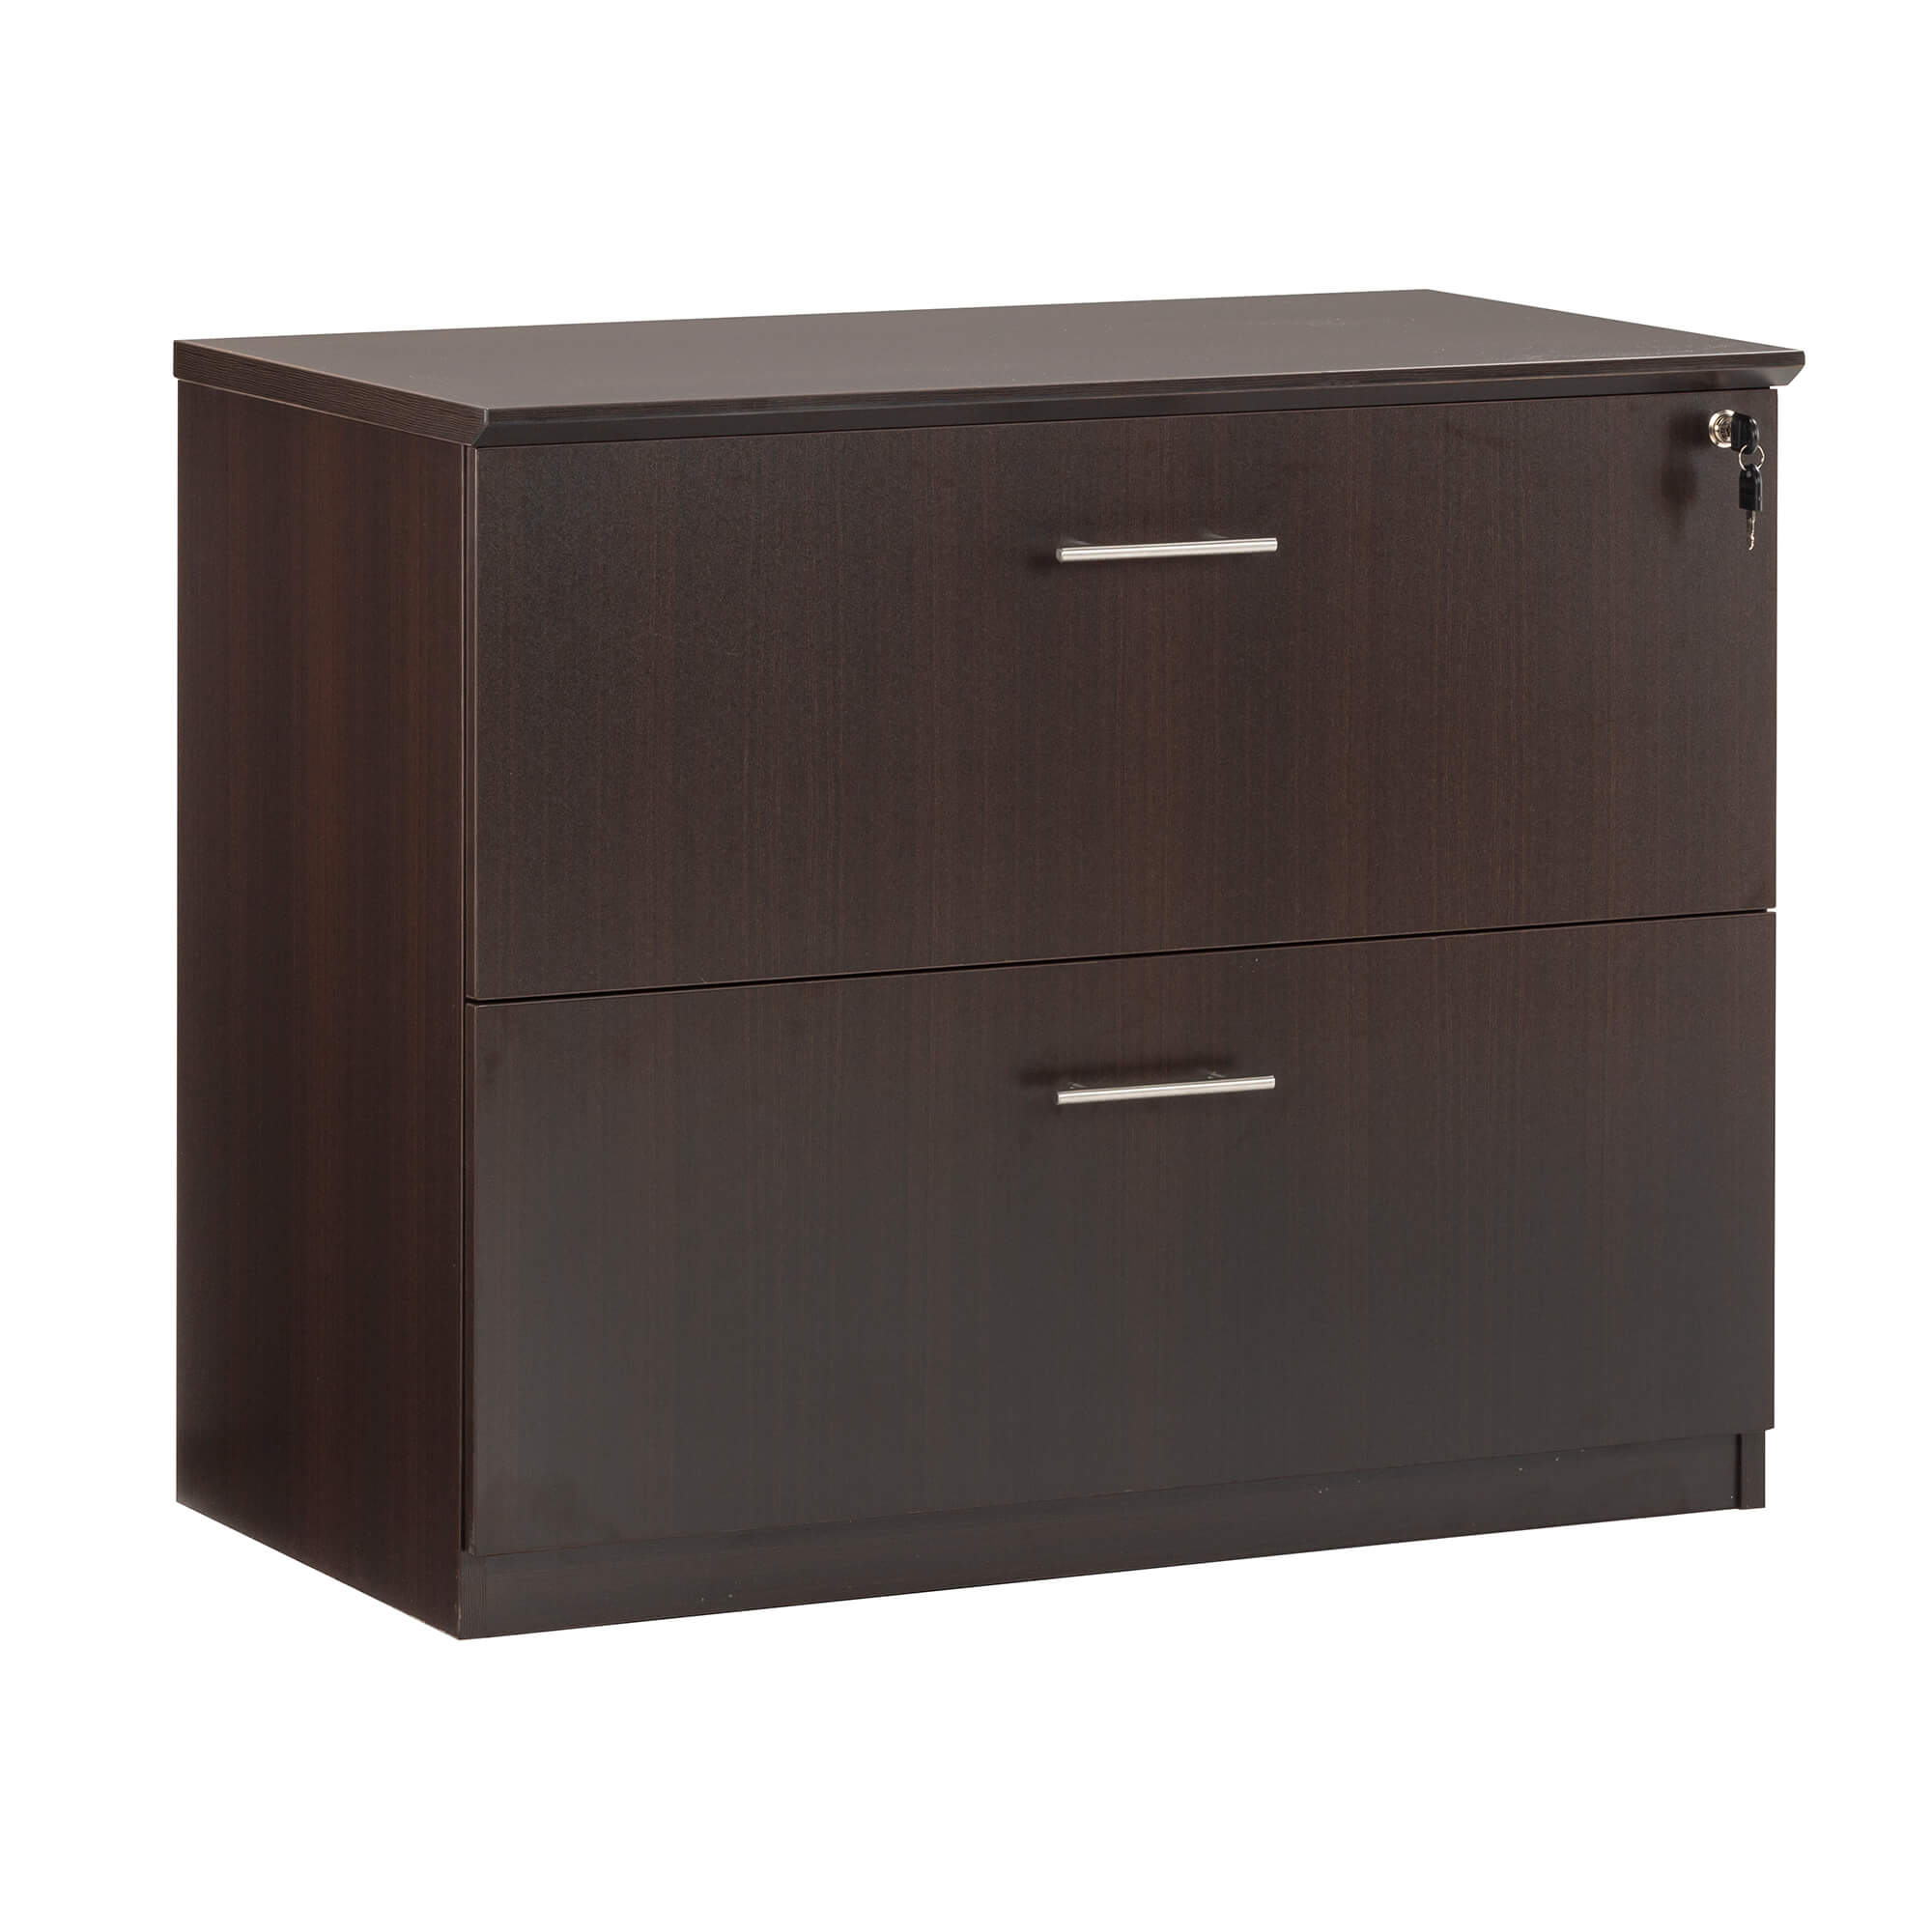 Conference room storage and accessories CUB MVLFLDC FAS